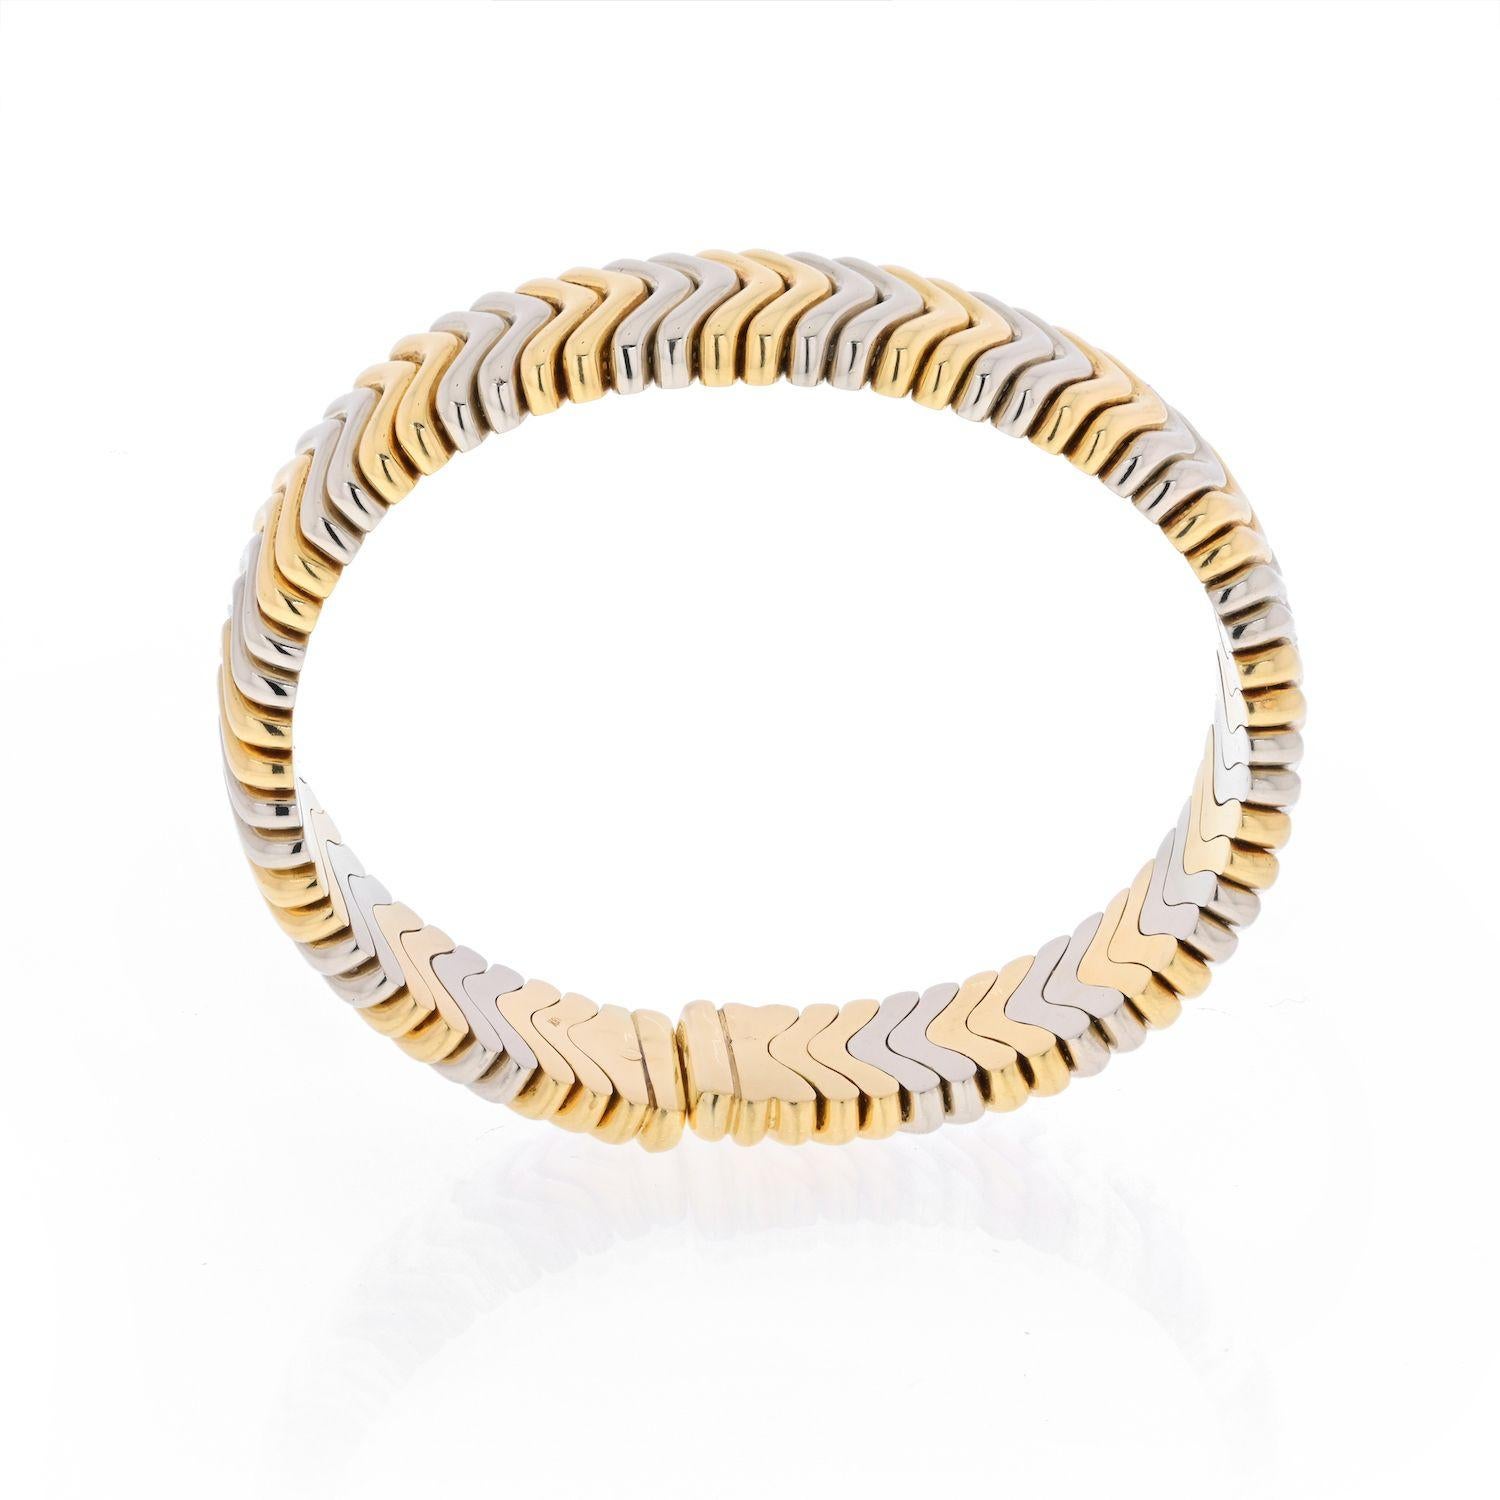 18K Tri color Bulgari tubogas bracelet in 18K rose, yellow and white gold.
Wrist size 6.25 inches. Flexible cuff. 